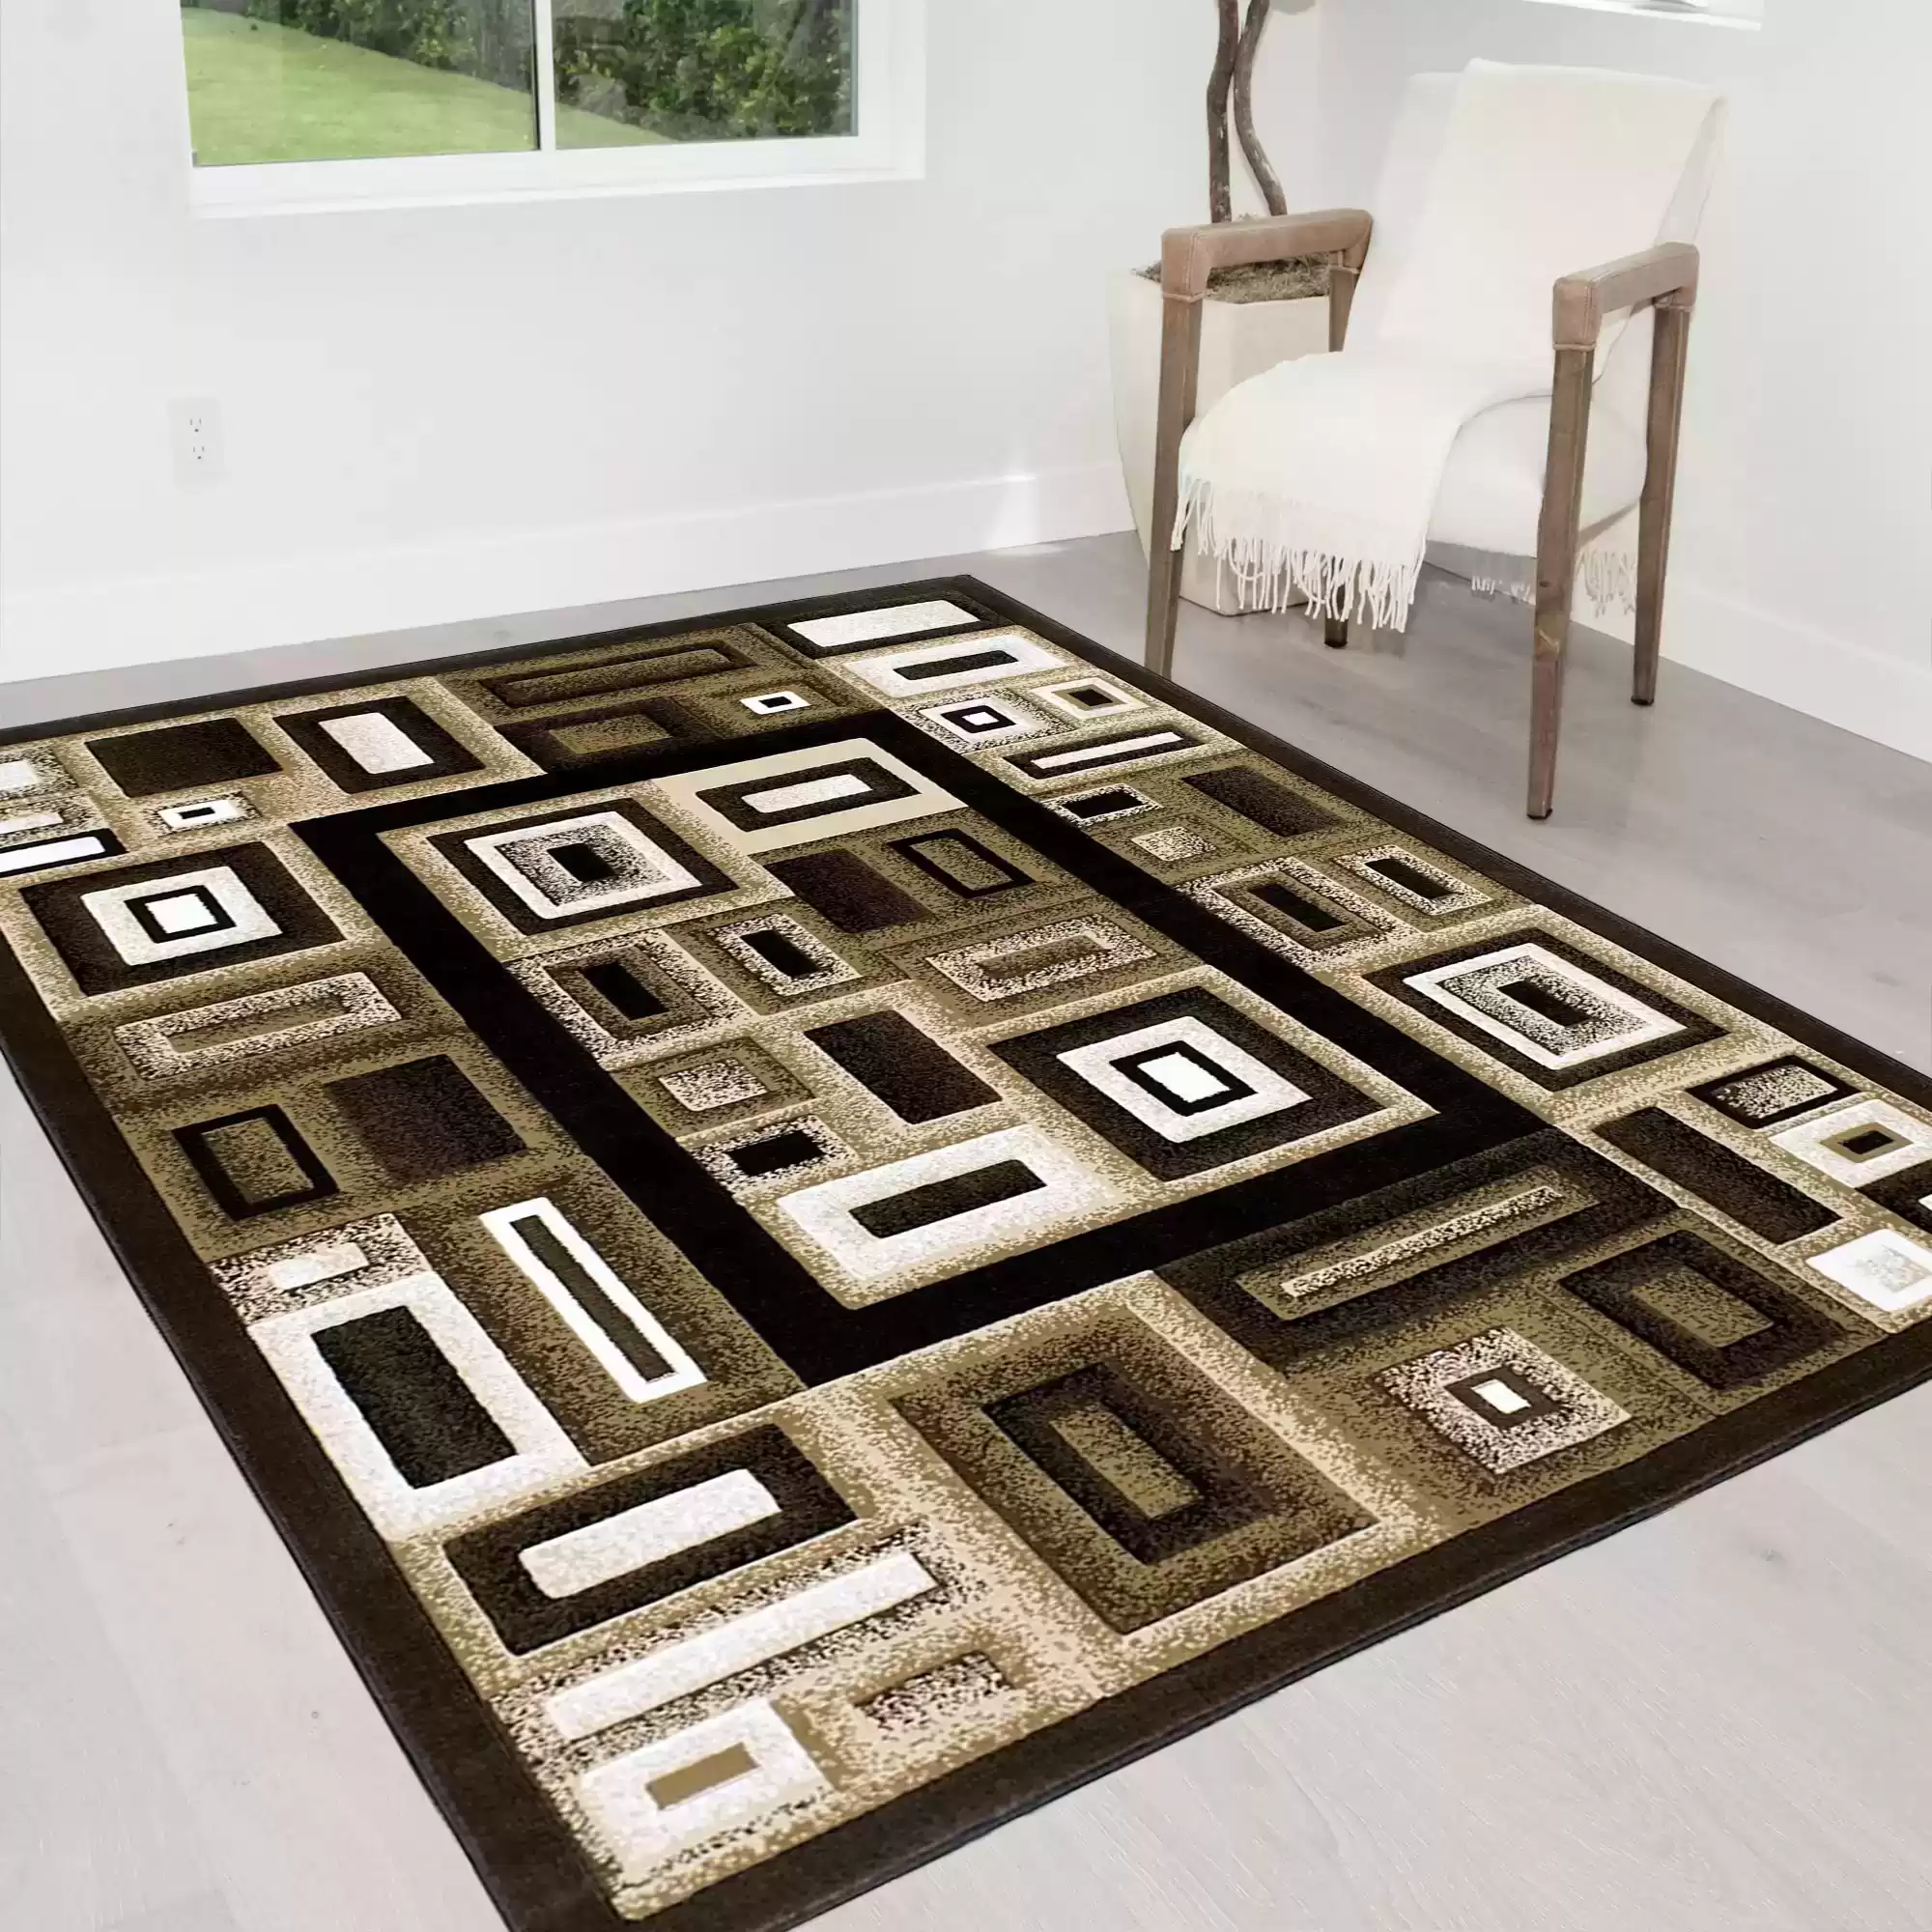 Brand new carpets, rugs-image